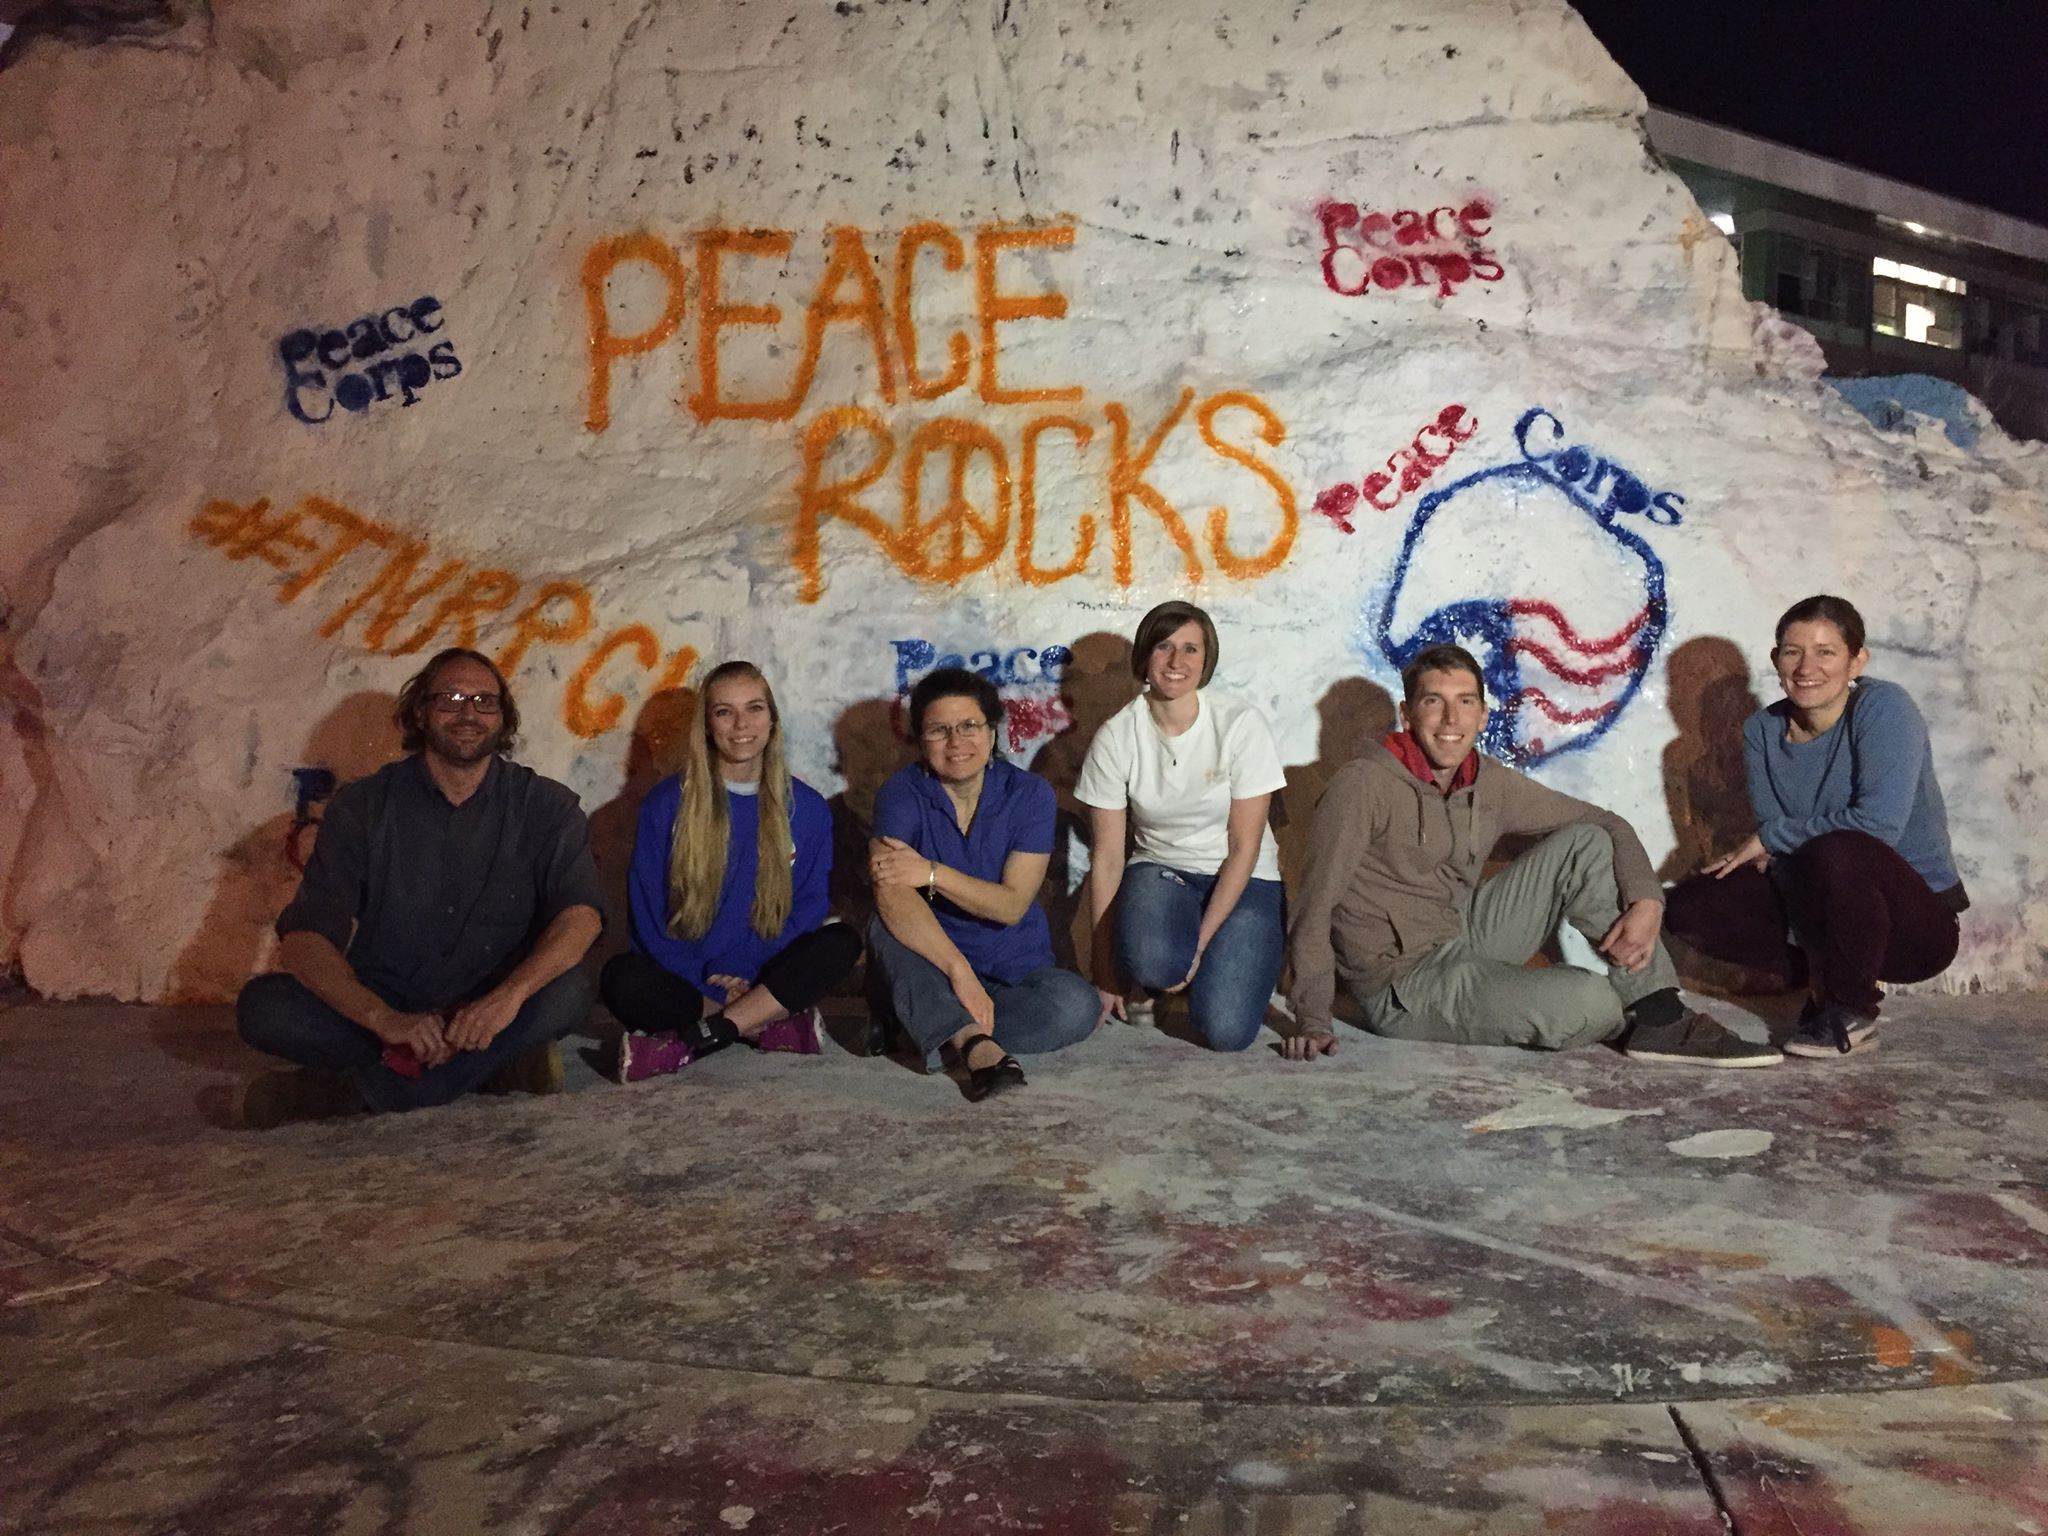 Photograph of returned Peace Corps volunteers by the Rock